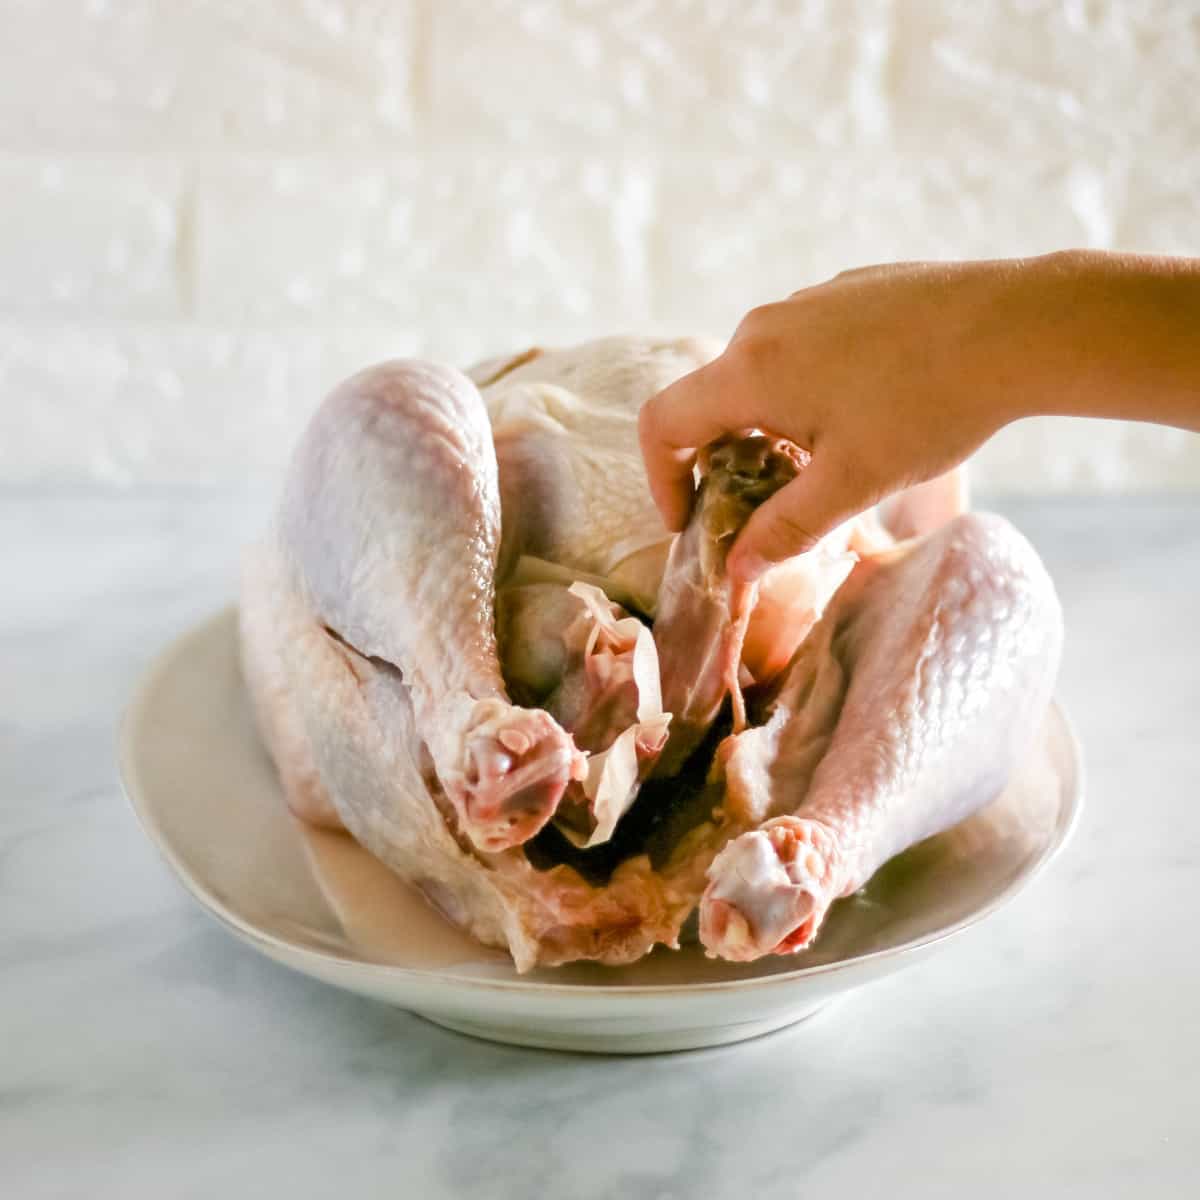 Pulling the neck out of the turkey cavity.